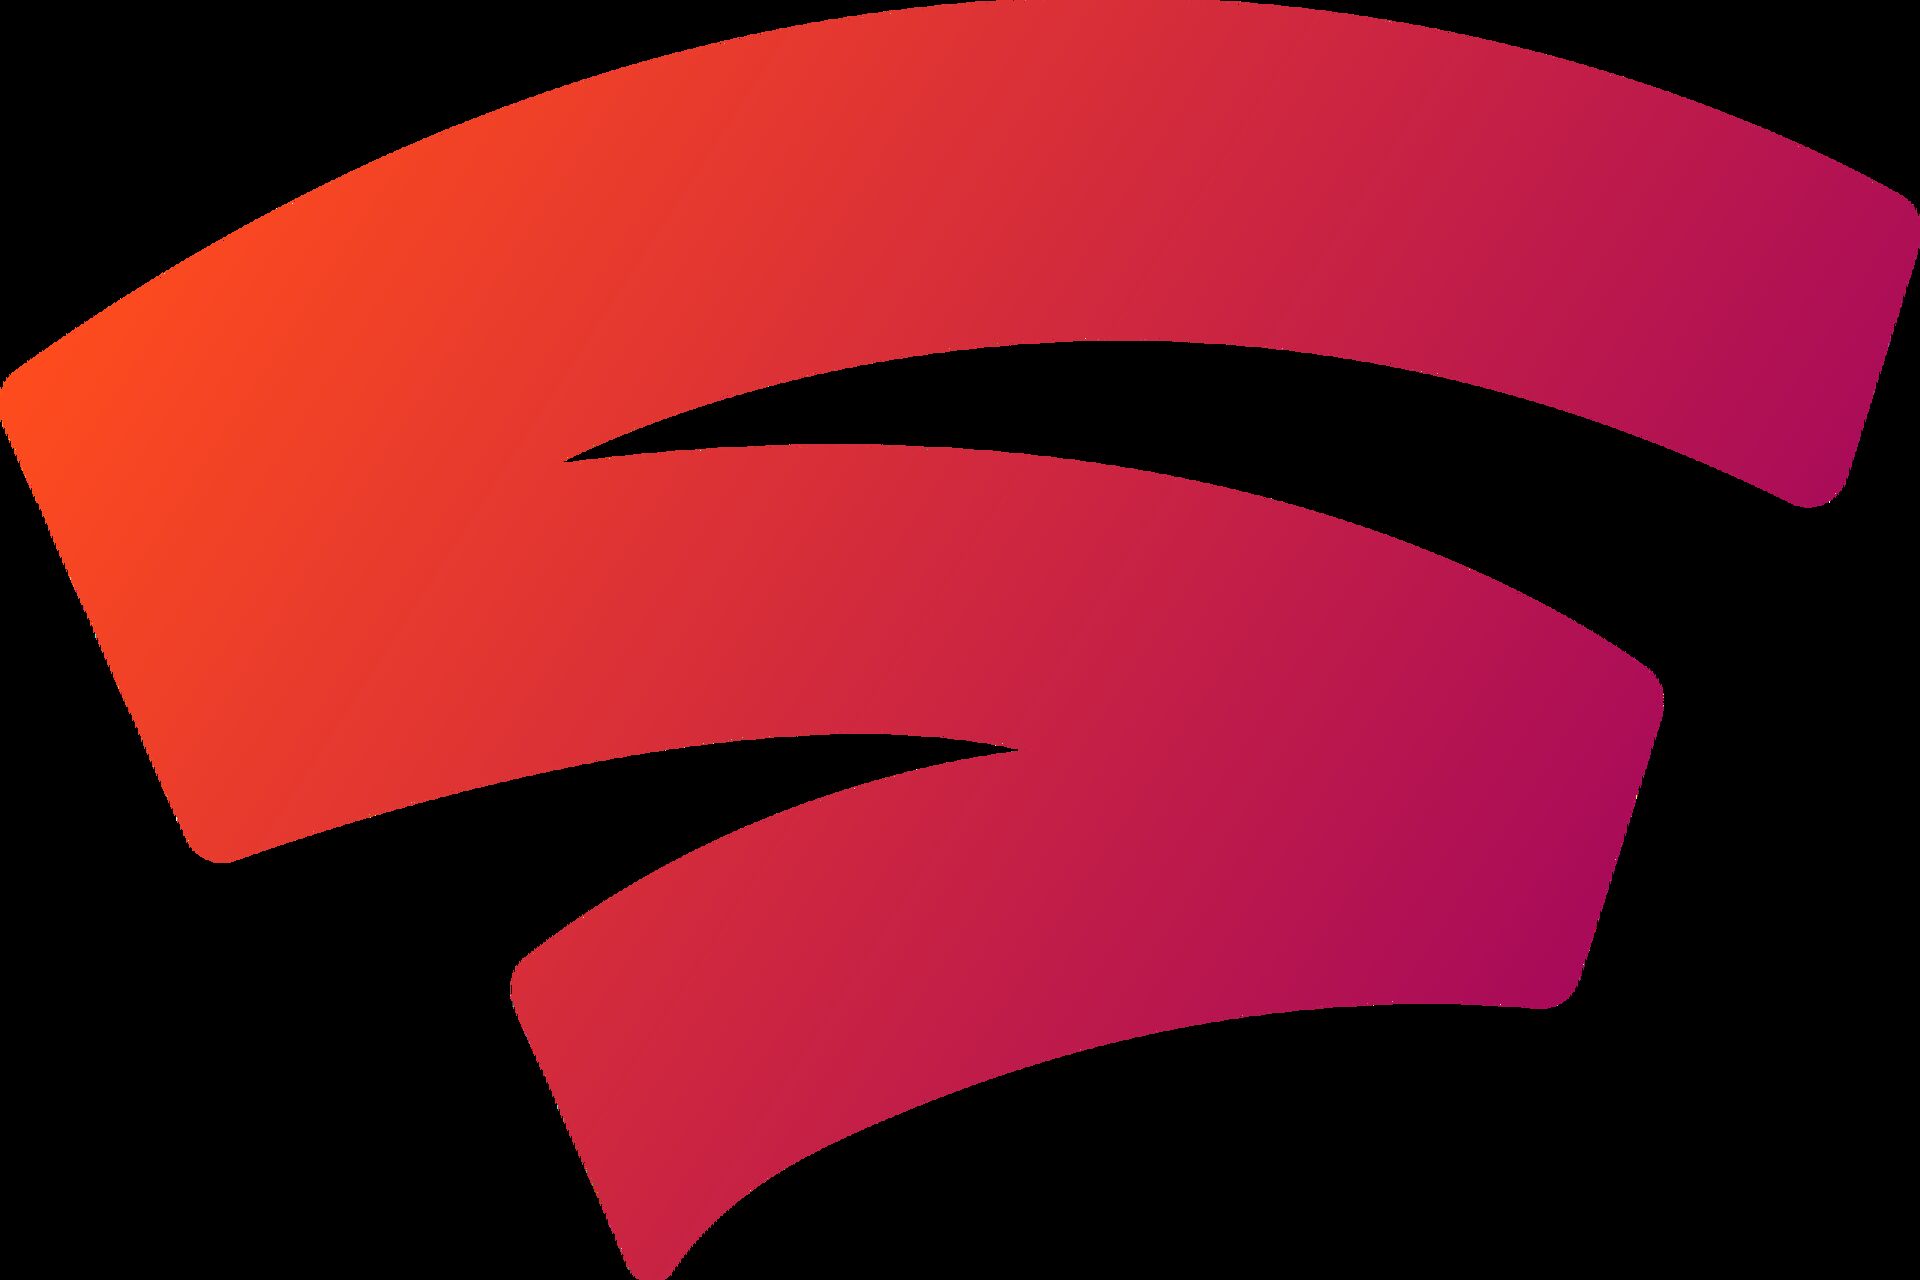 Bungie, IO Interactive, and Ubisoft working to bring Stadia game saves to PC